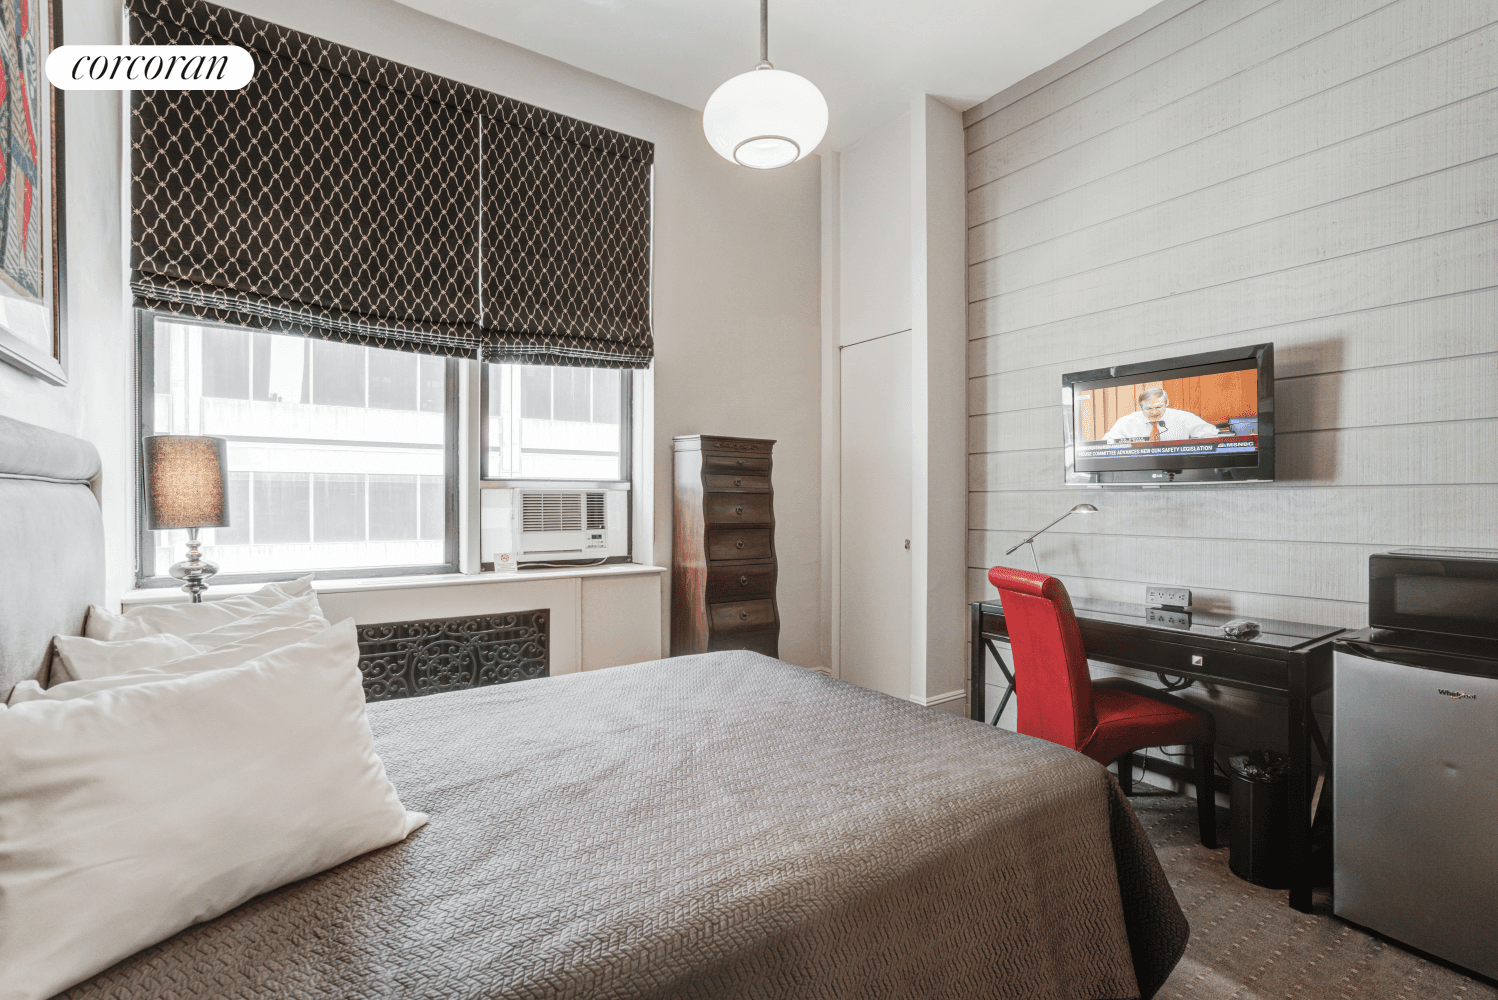 Welcome to our furnished rental studio in Midtown !